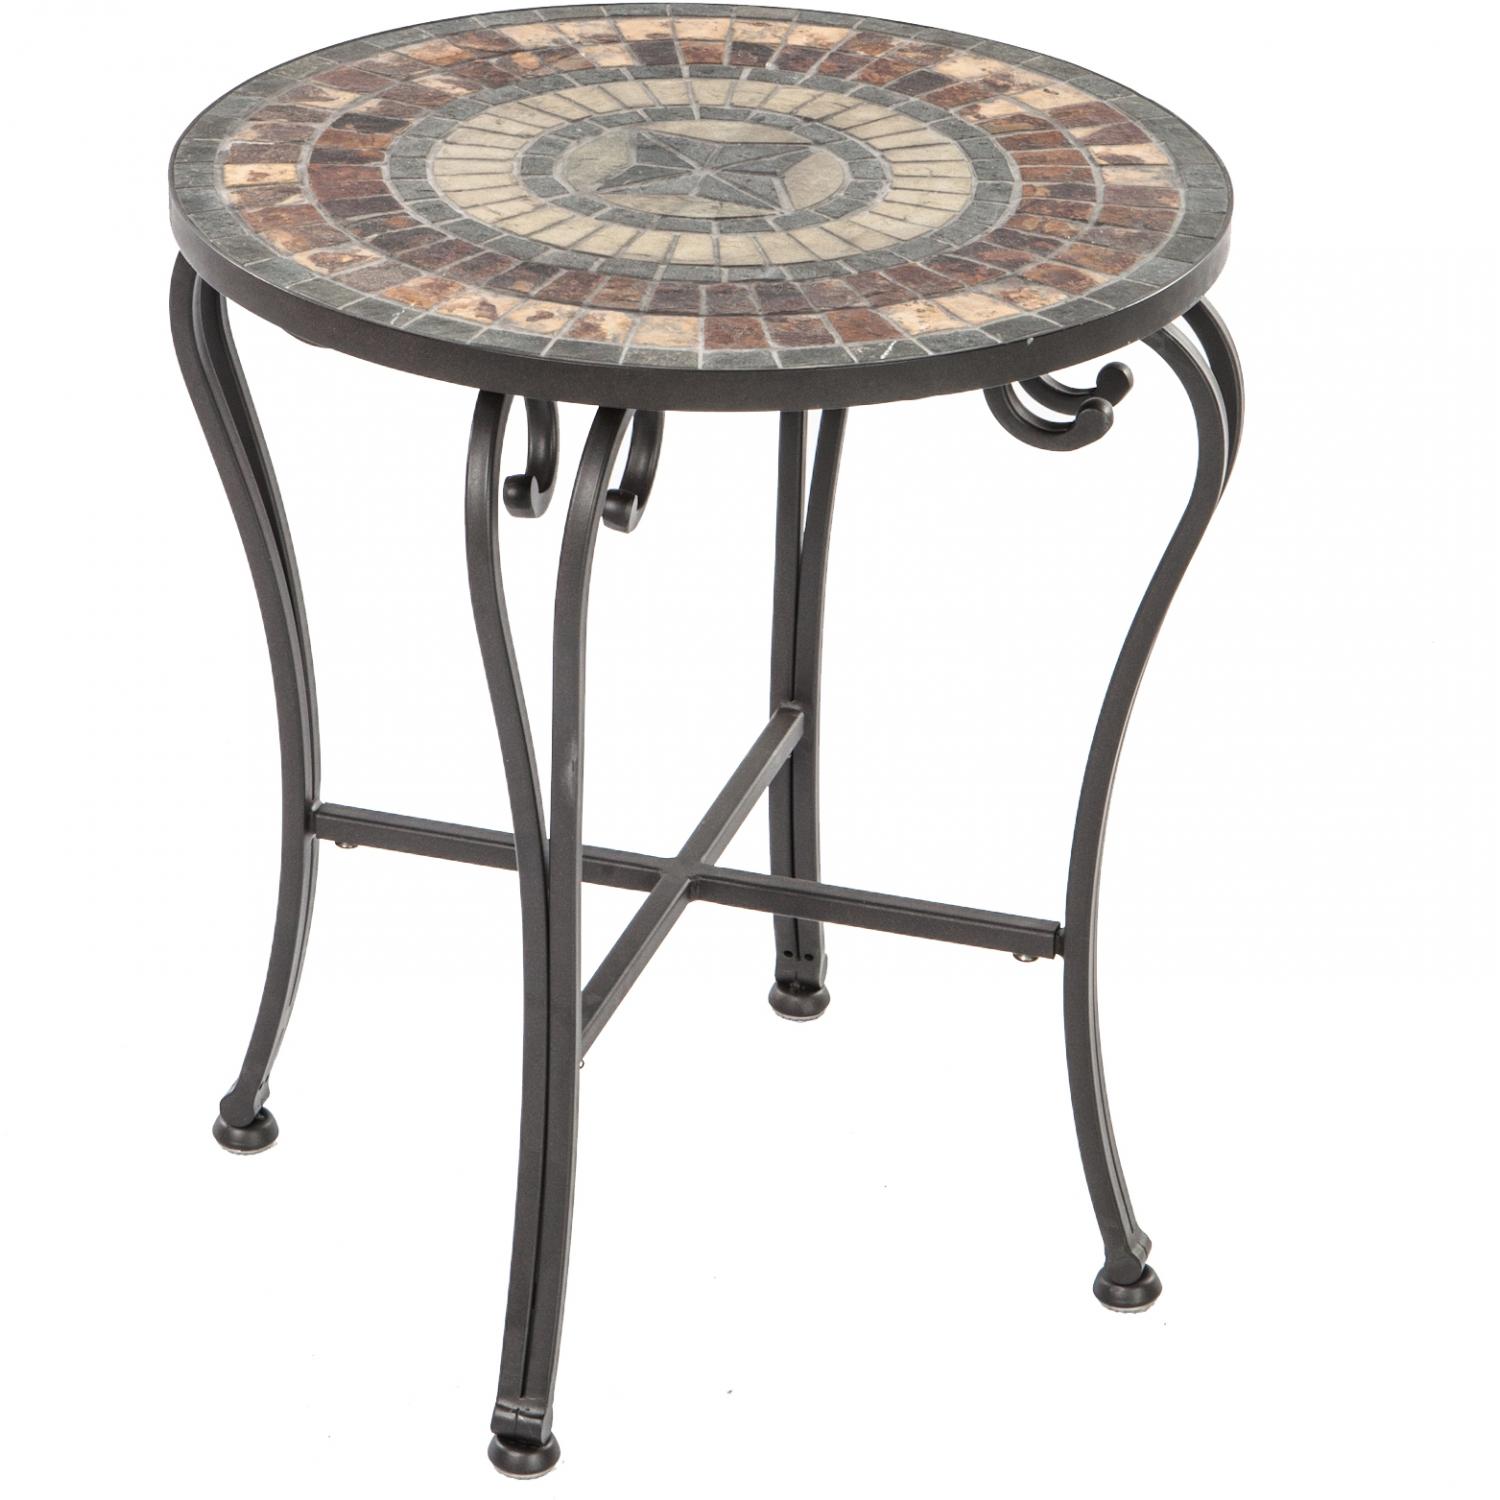 alfresco home asti mosaic side table bbq guys garden patio accent ashley furniture rustic end tables nite stands mid century kitchen pier one imports rugs interior decoration